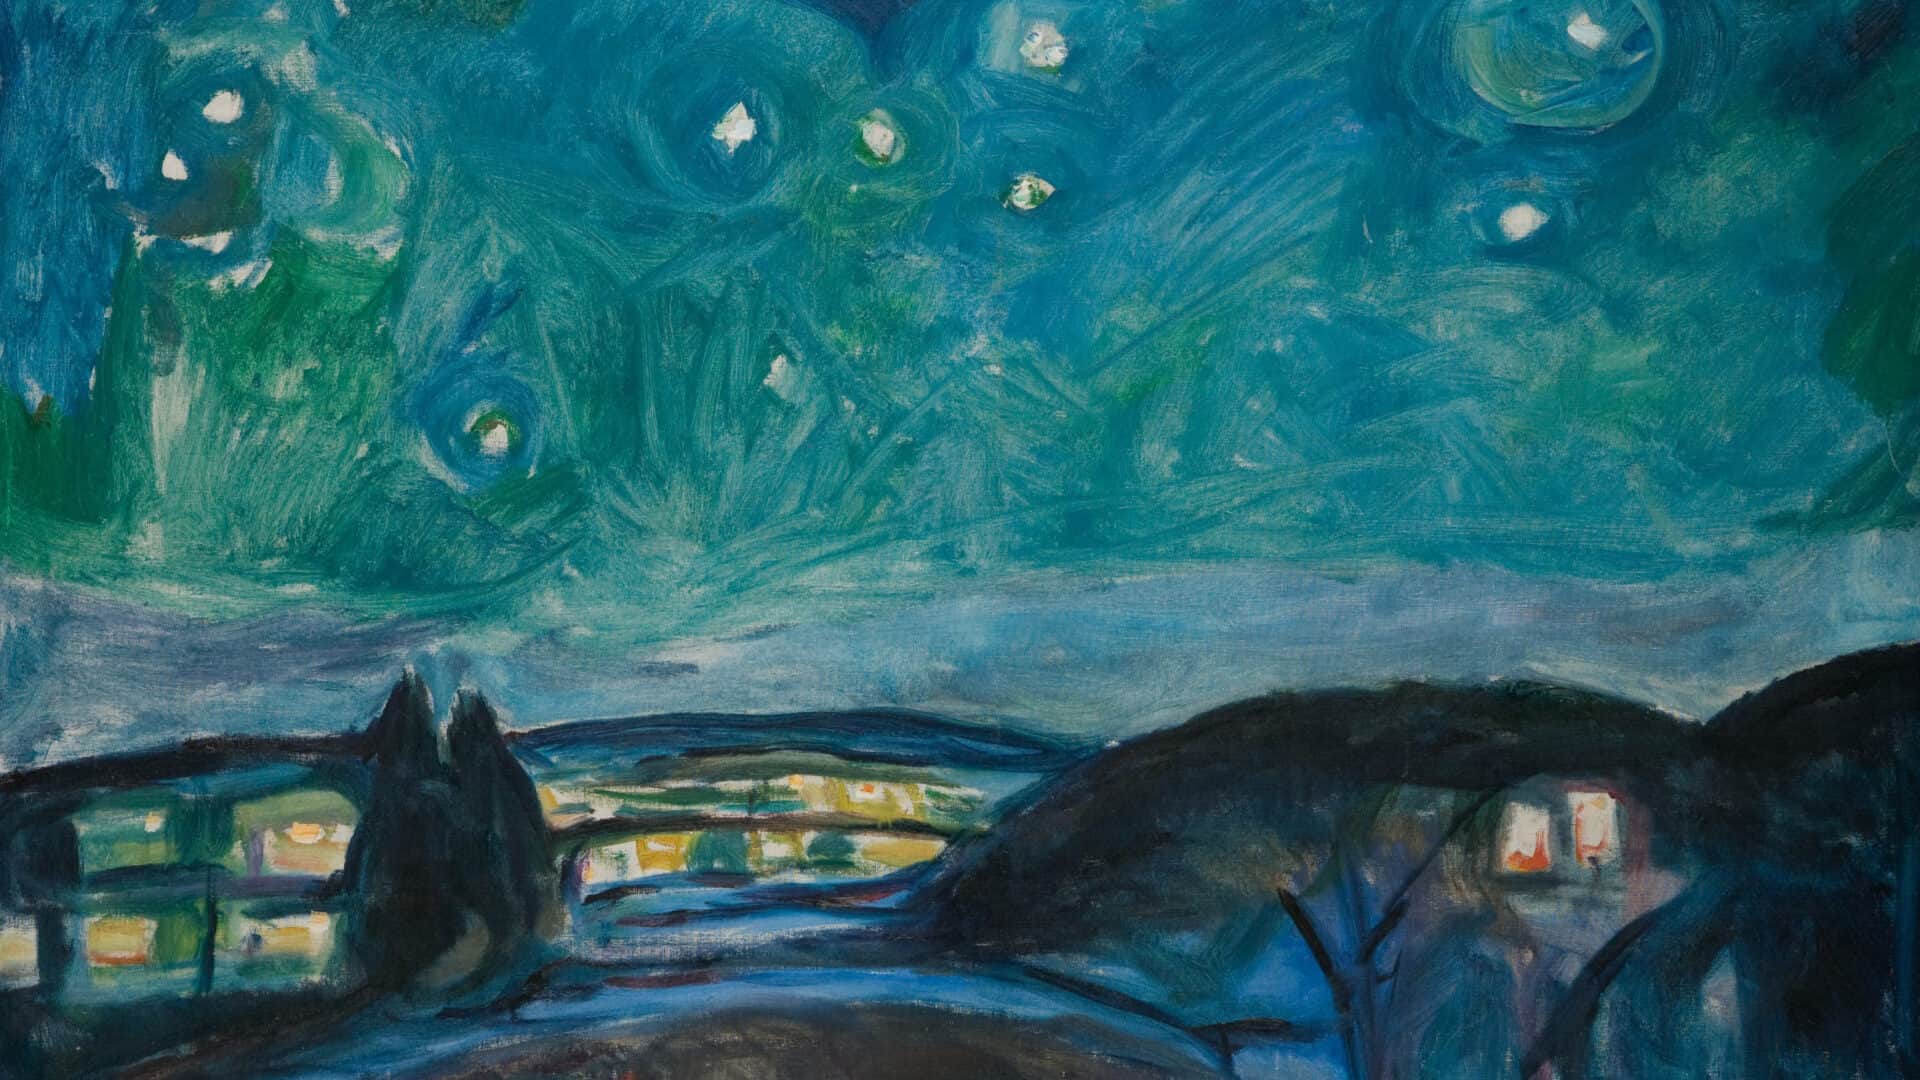 Points of light show in a blue-green sky over dark hills in Edvard Munch's Starry Night, 1922–24. Munchmuseet. Artists Rights Society , New York. Press photo courtesy of the Clark Art Institute.